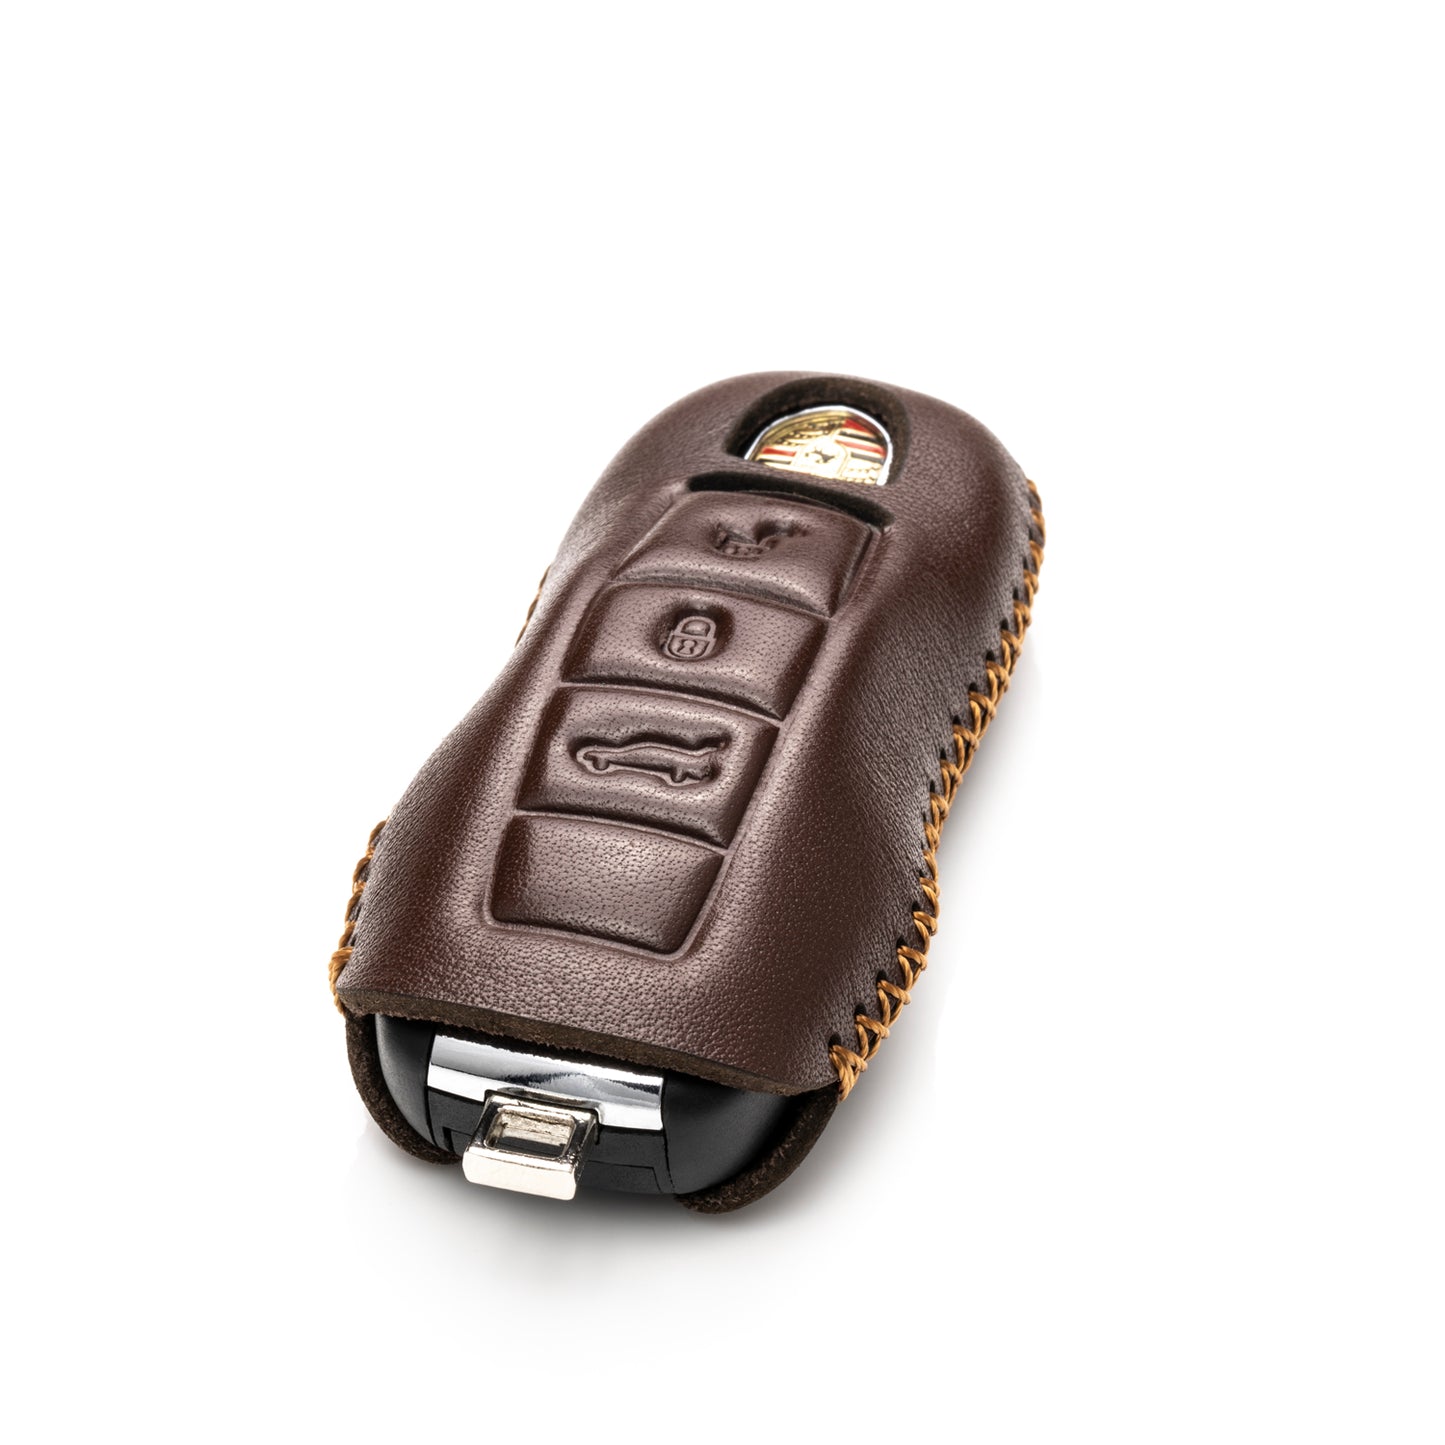 Vitodeco 3-Button Genuine Leather Smart Key Fob Case with Leather Key Strap Compatible for Porsche 718, Porsche 911, Porsche Panamera, Porsche Cayenne